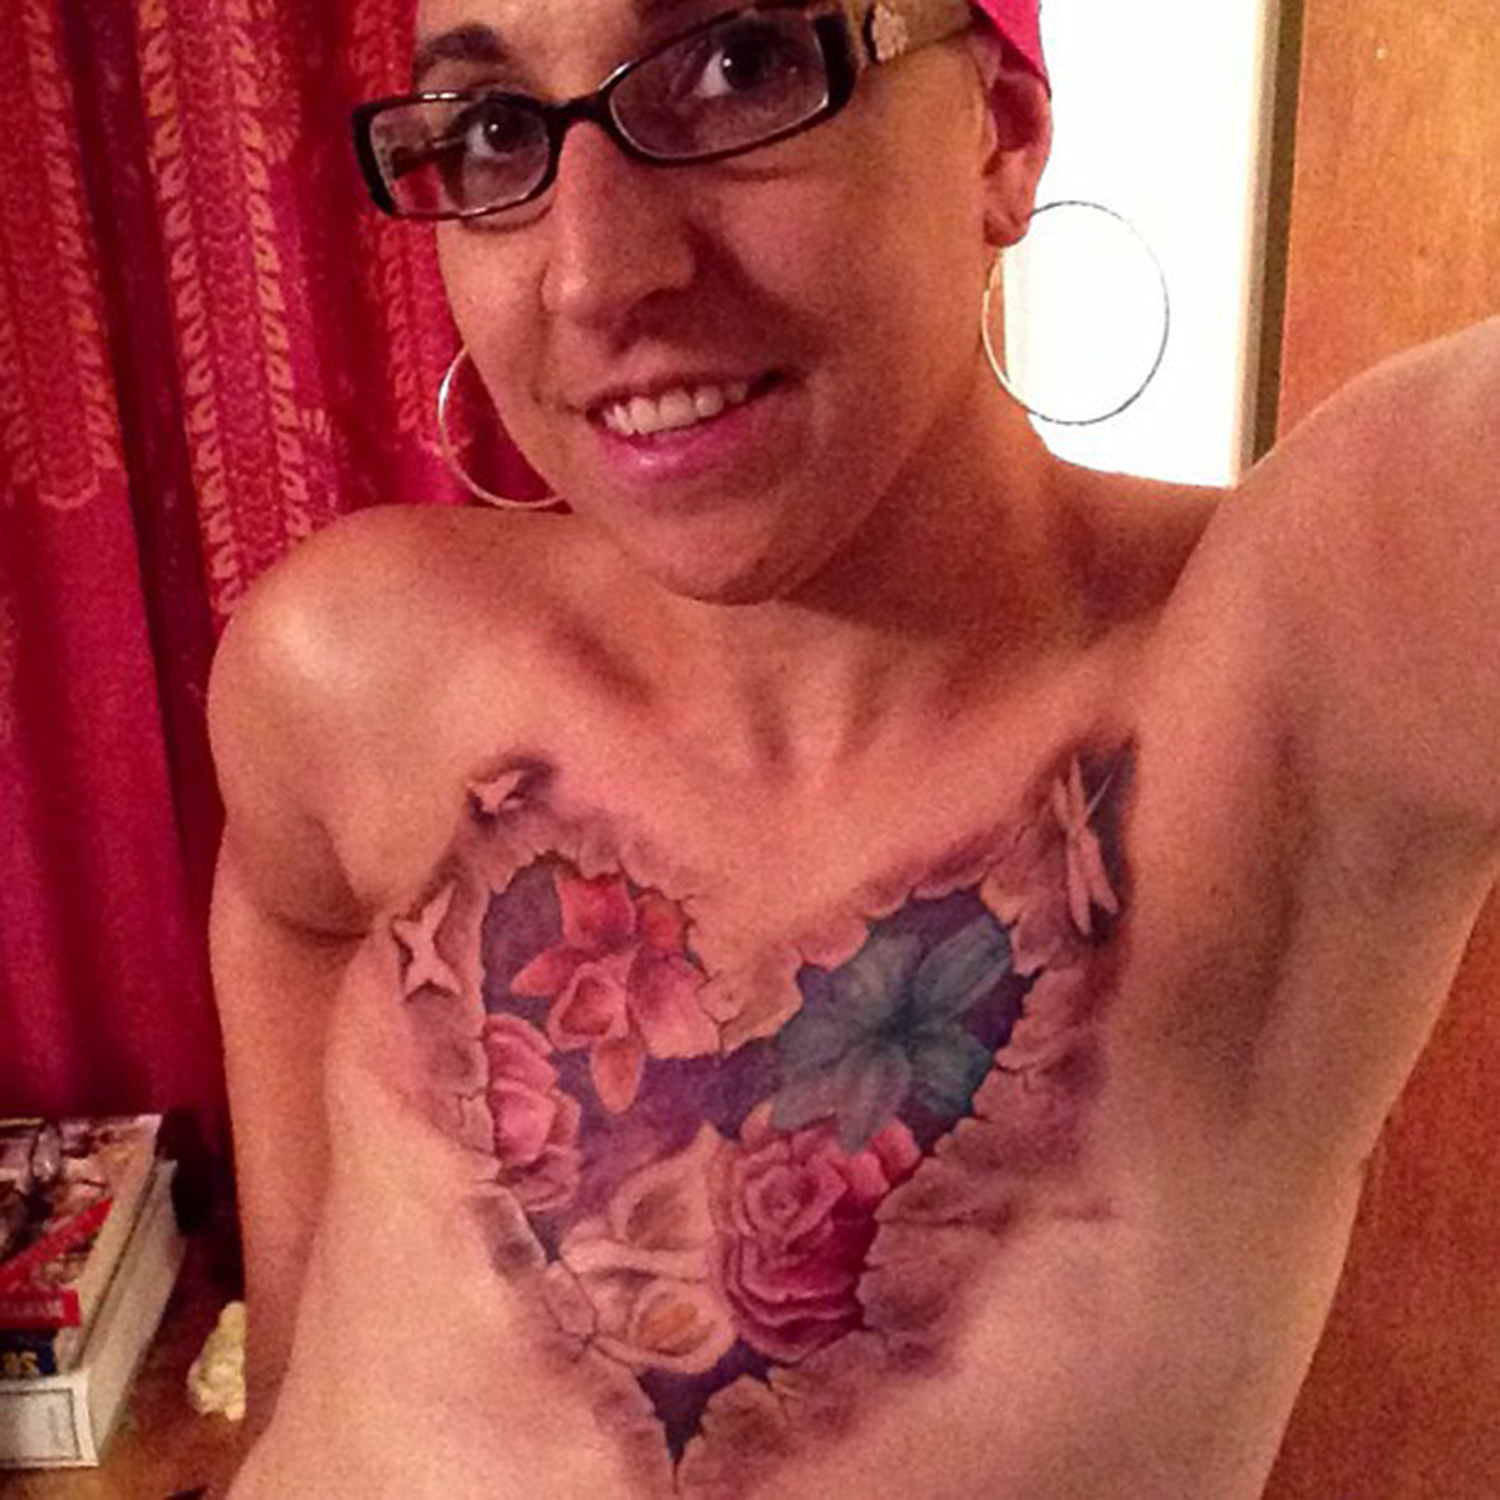 Flat and fabulous': Topless tattoo selfie inspires cancer survivors